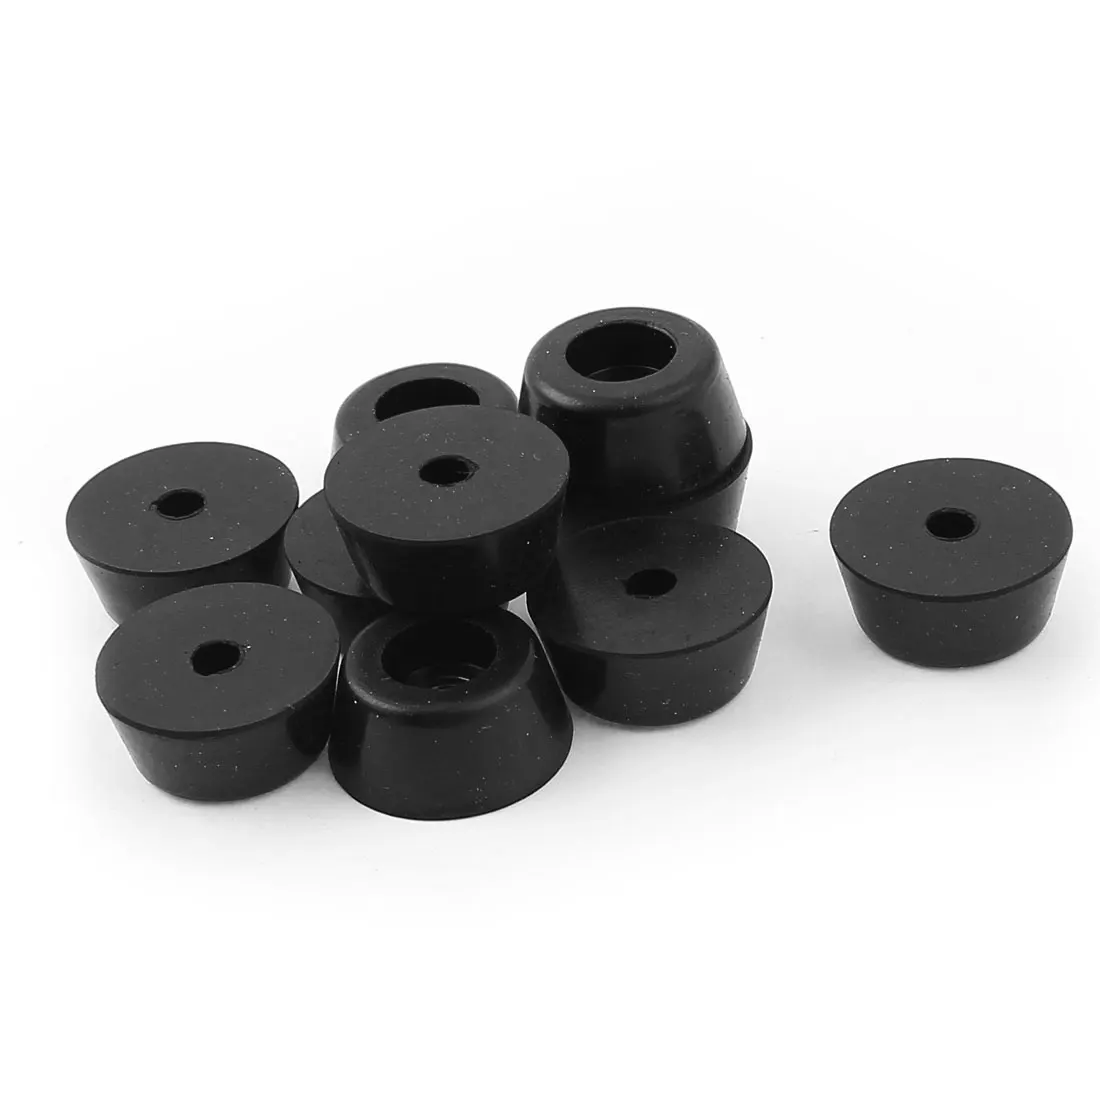 Image X Autohaux 10Pcs Black Rubber 25Mmx12mm Conical Treadmill Feet Protector Chair Leg Tips